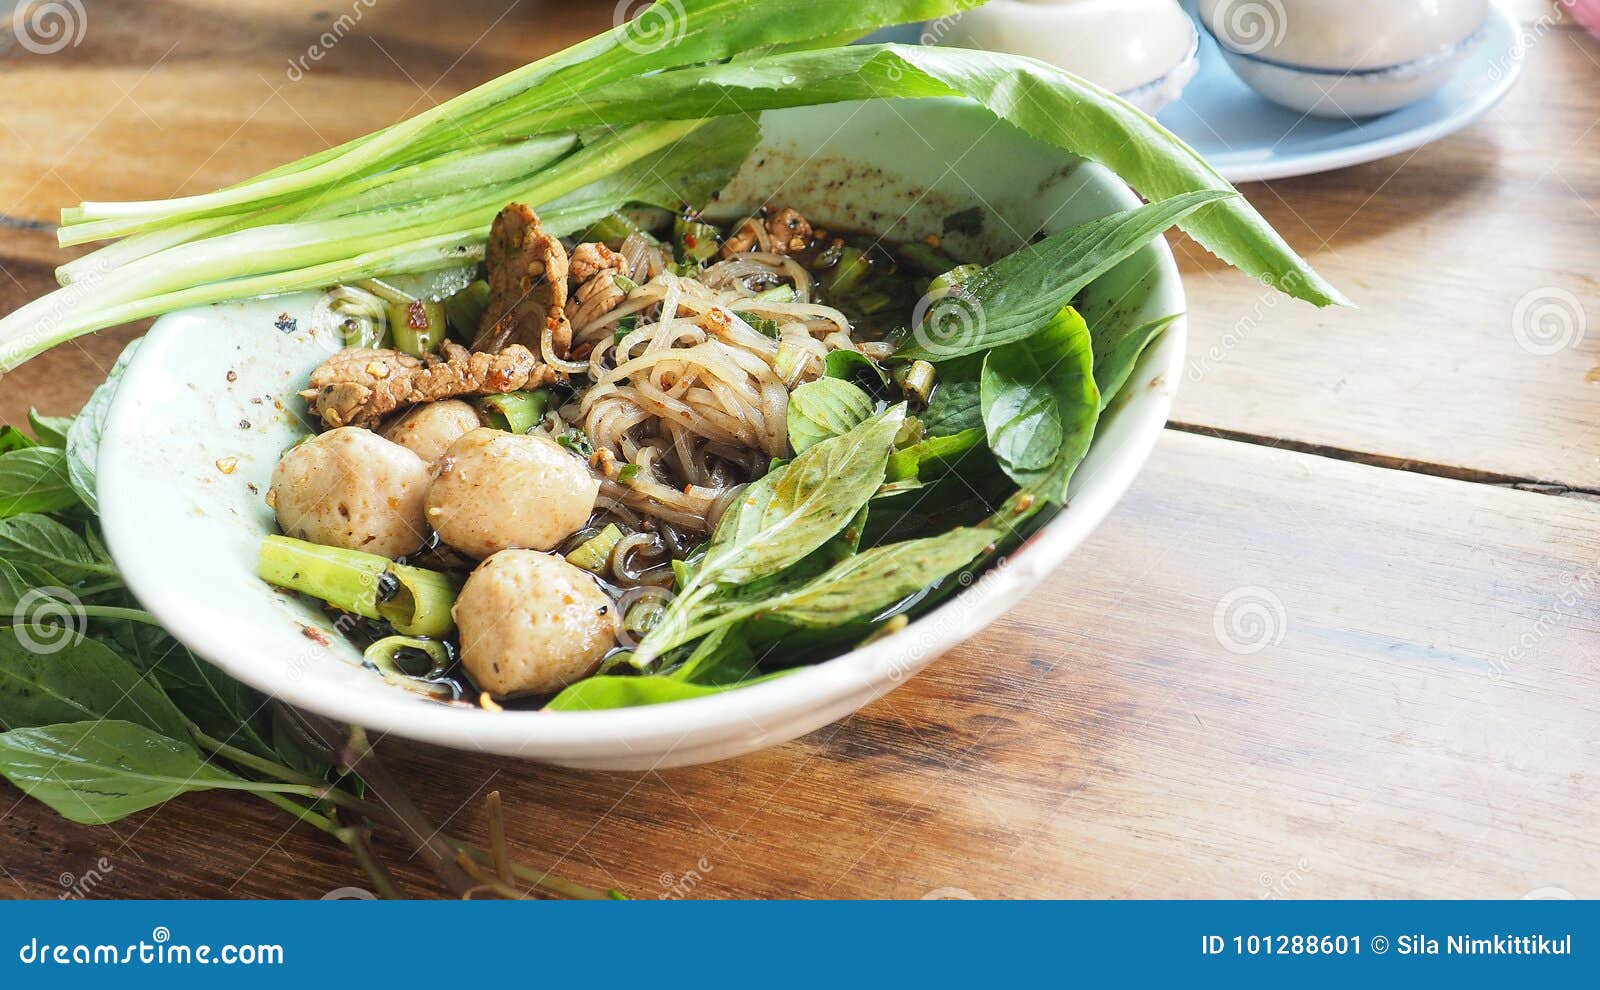 Boat Noodles Beef Super Spicy Has Thyme And Parsley Stock Image Image Of Dark Sauce 101288601,How Long Do Bettas Live In Fish Bowls